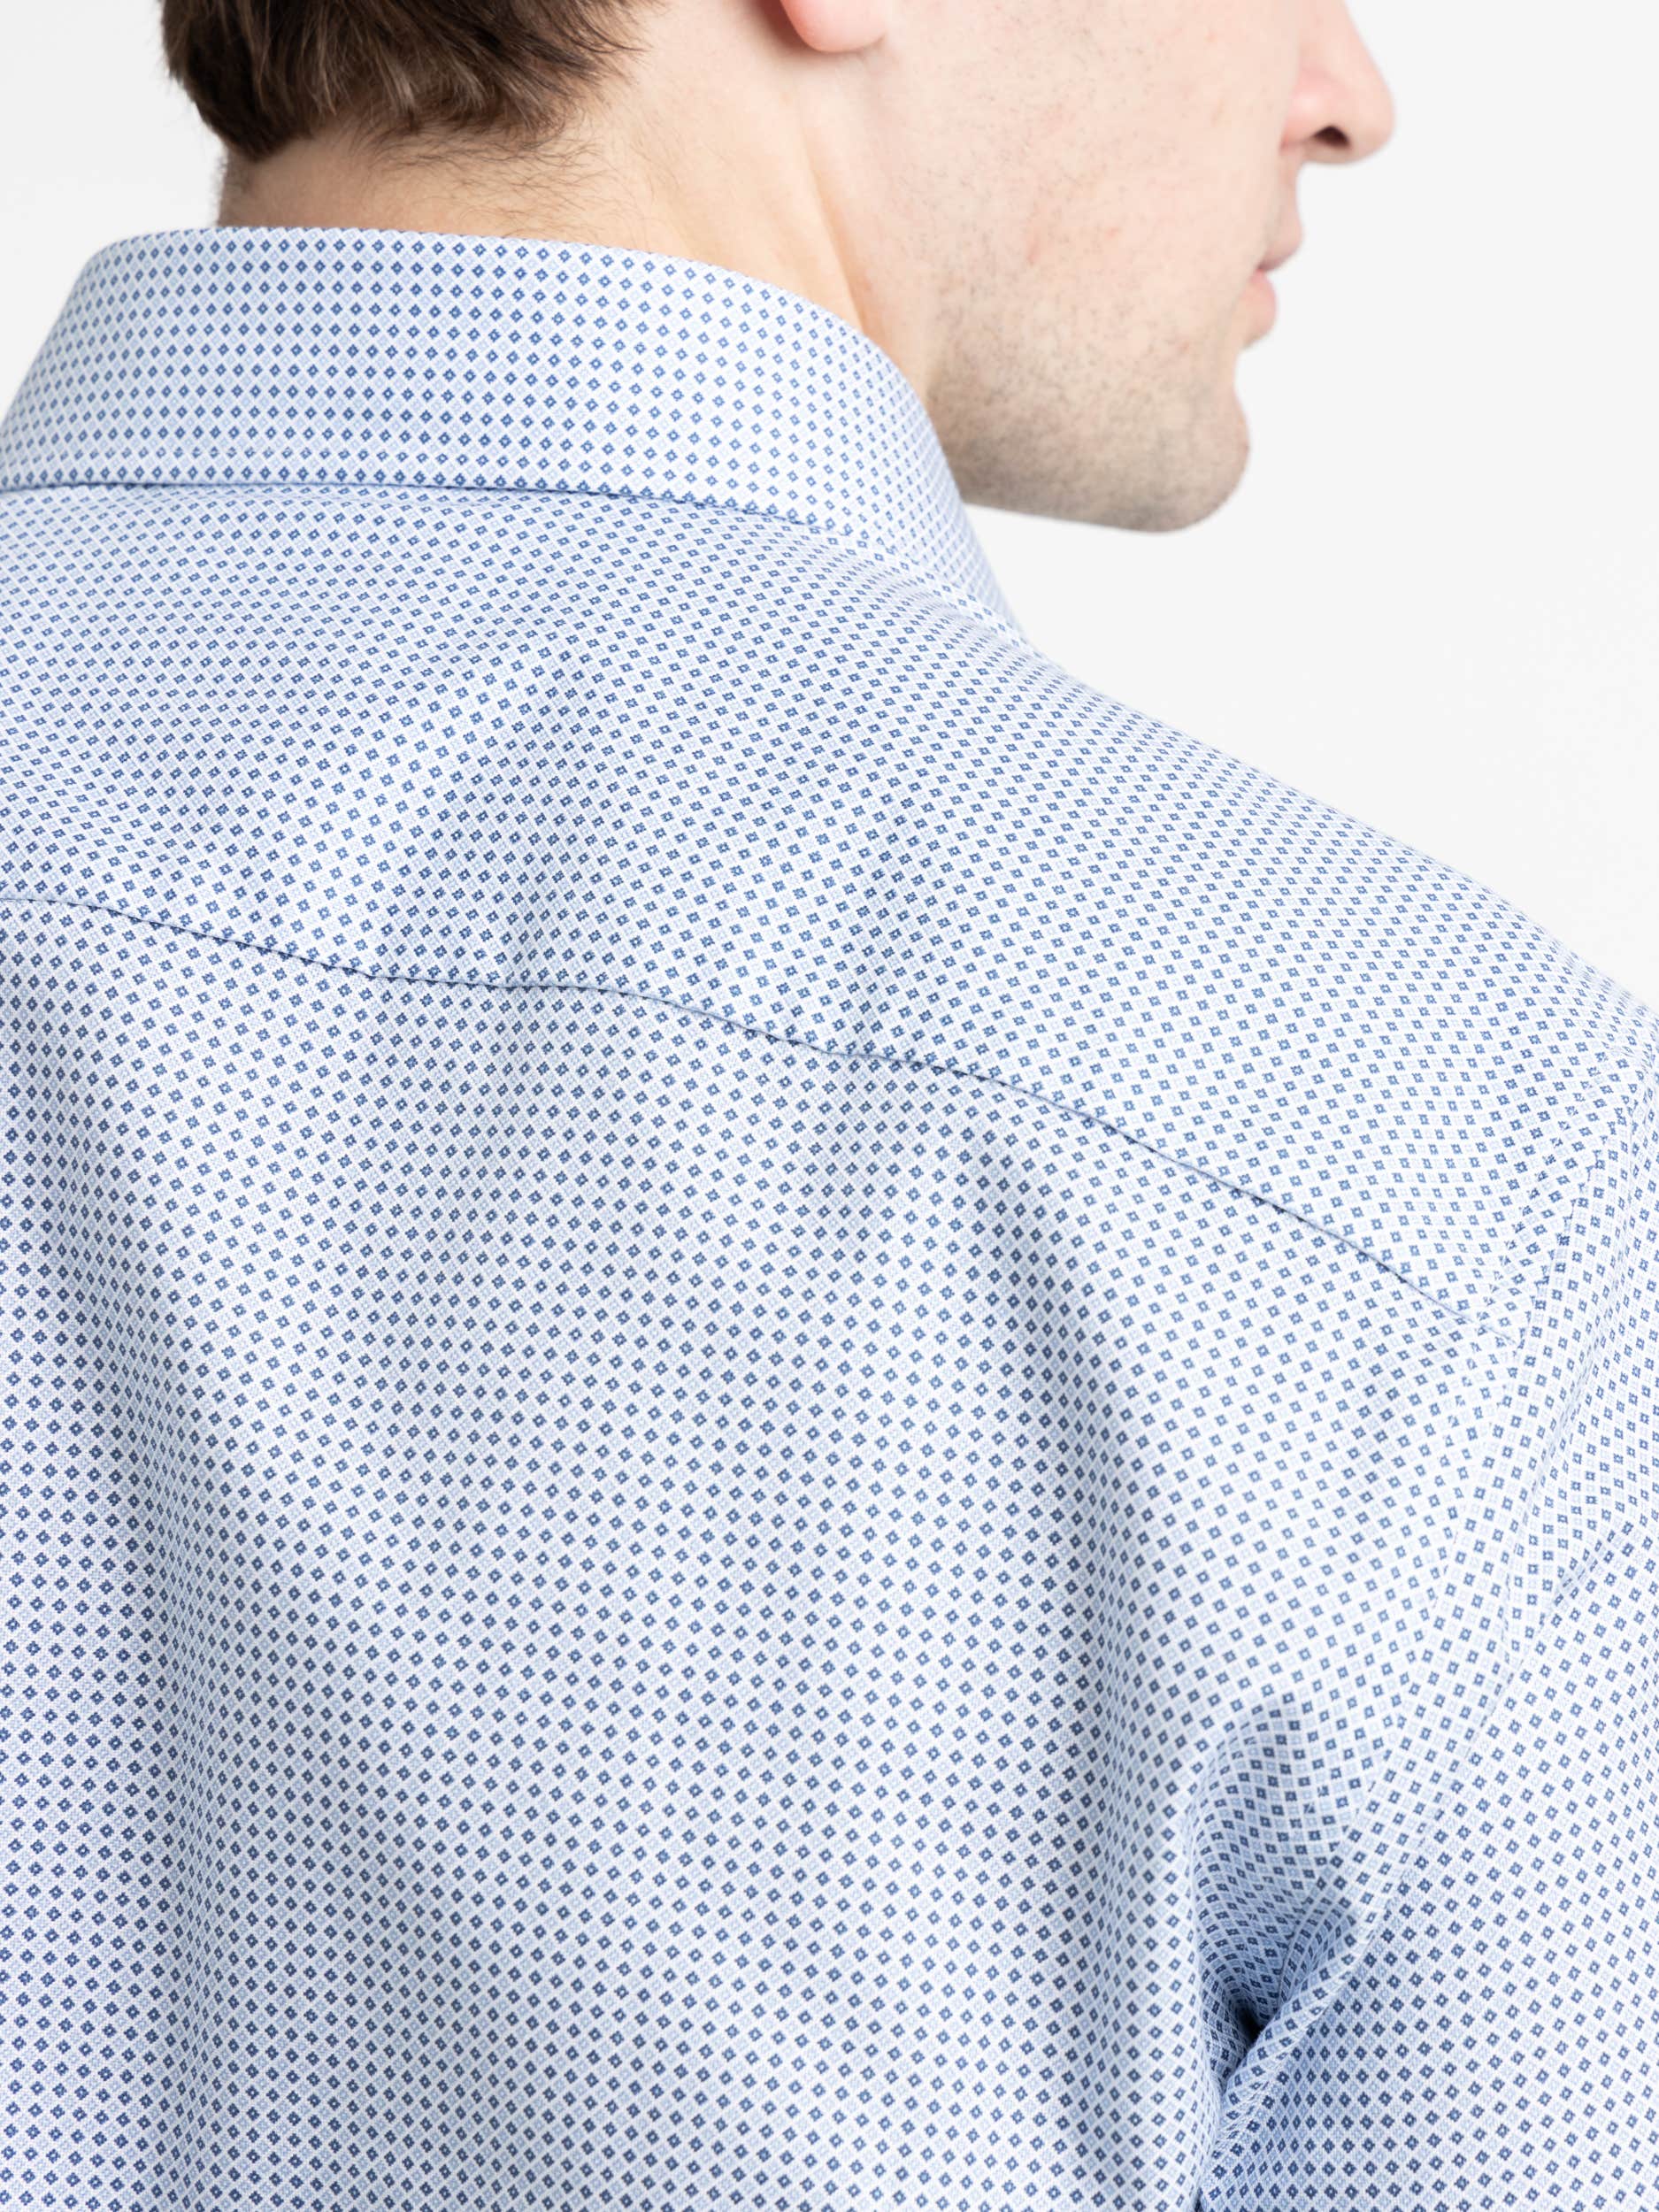 Blue Micro Patterned Twill Shirt